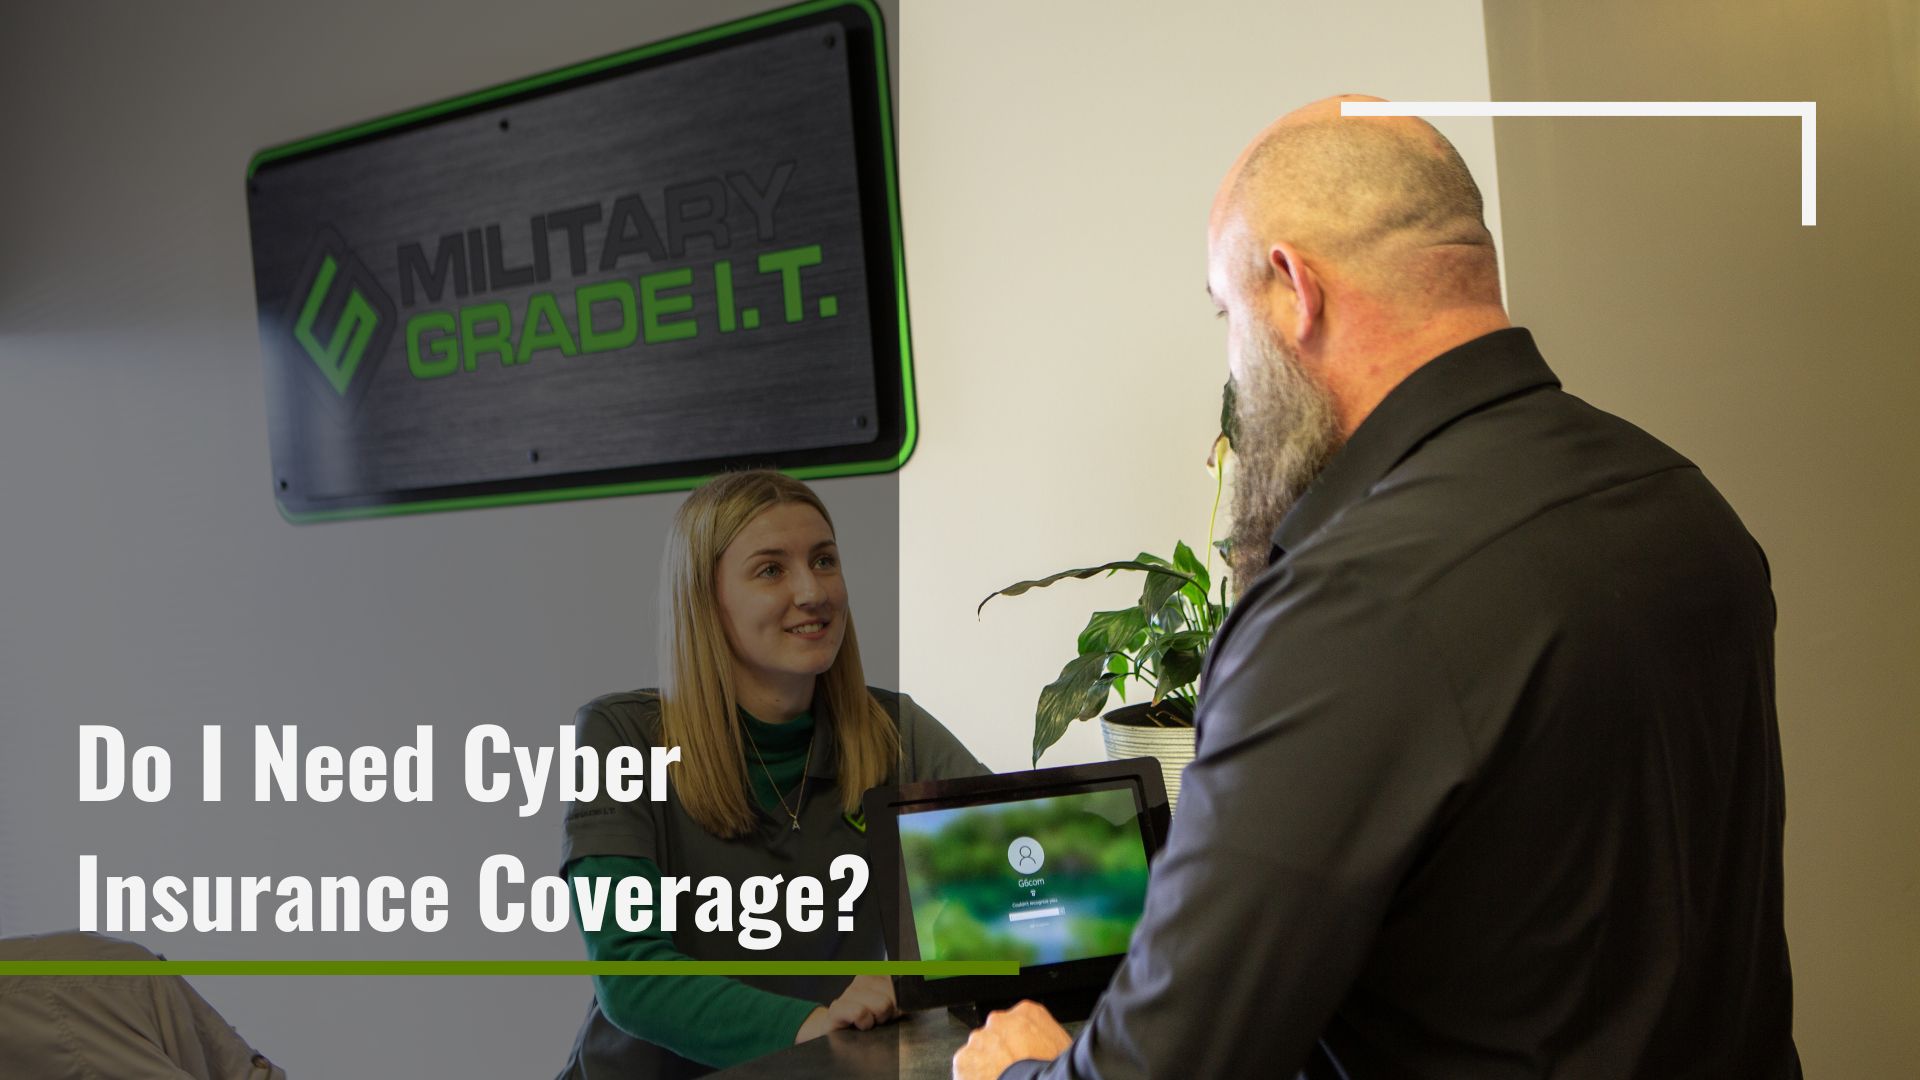 Cyber Insurance Coverage from G6 IT